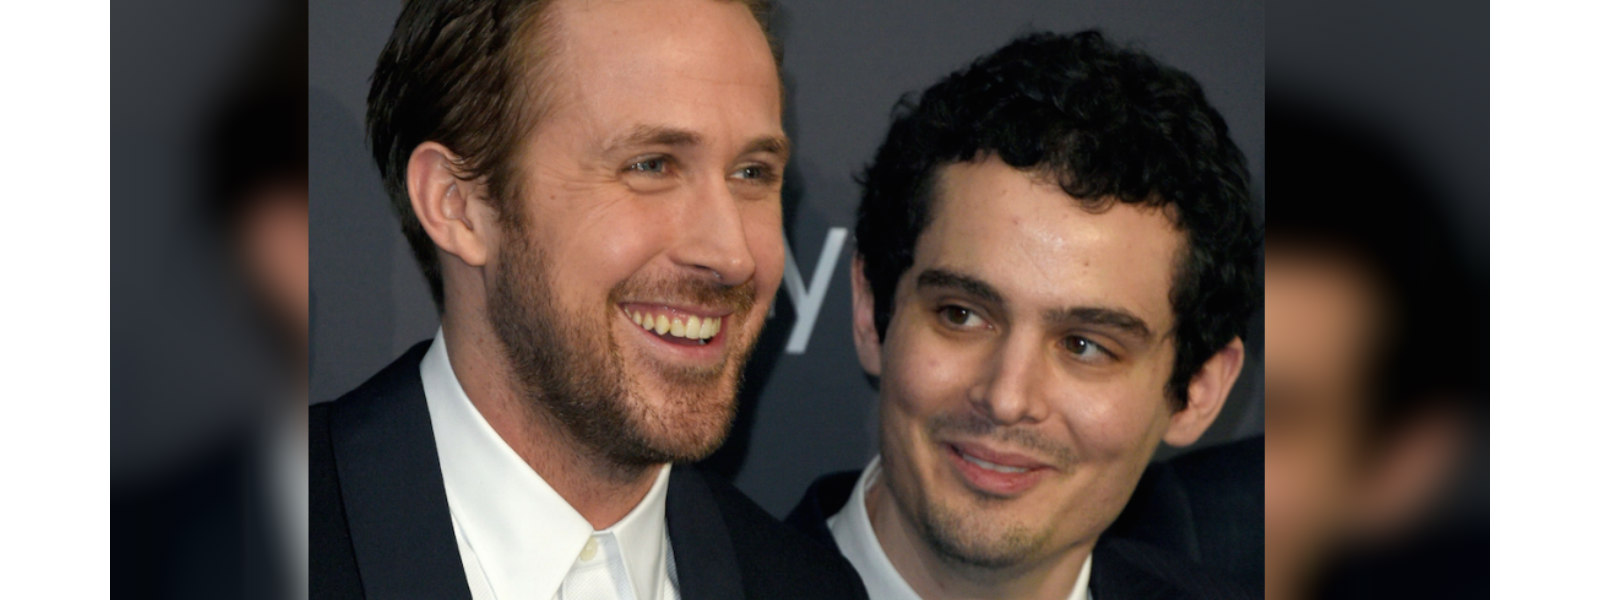 Gosling pairs up with Chazelle for "First Man" 